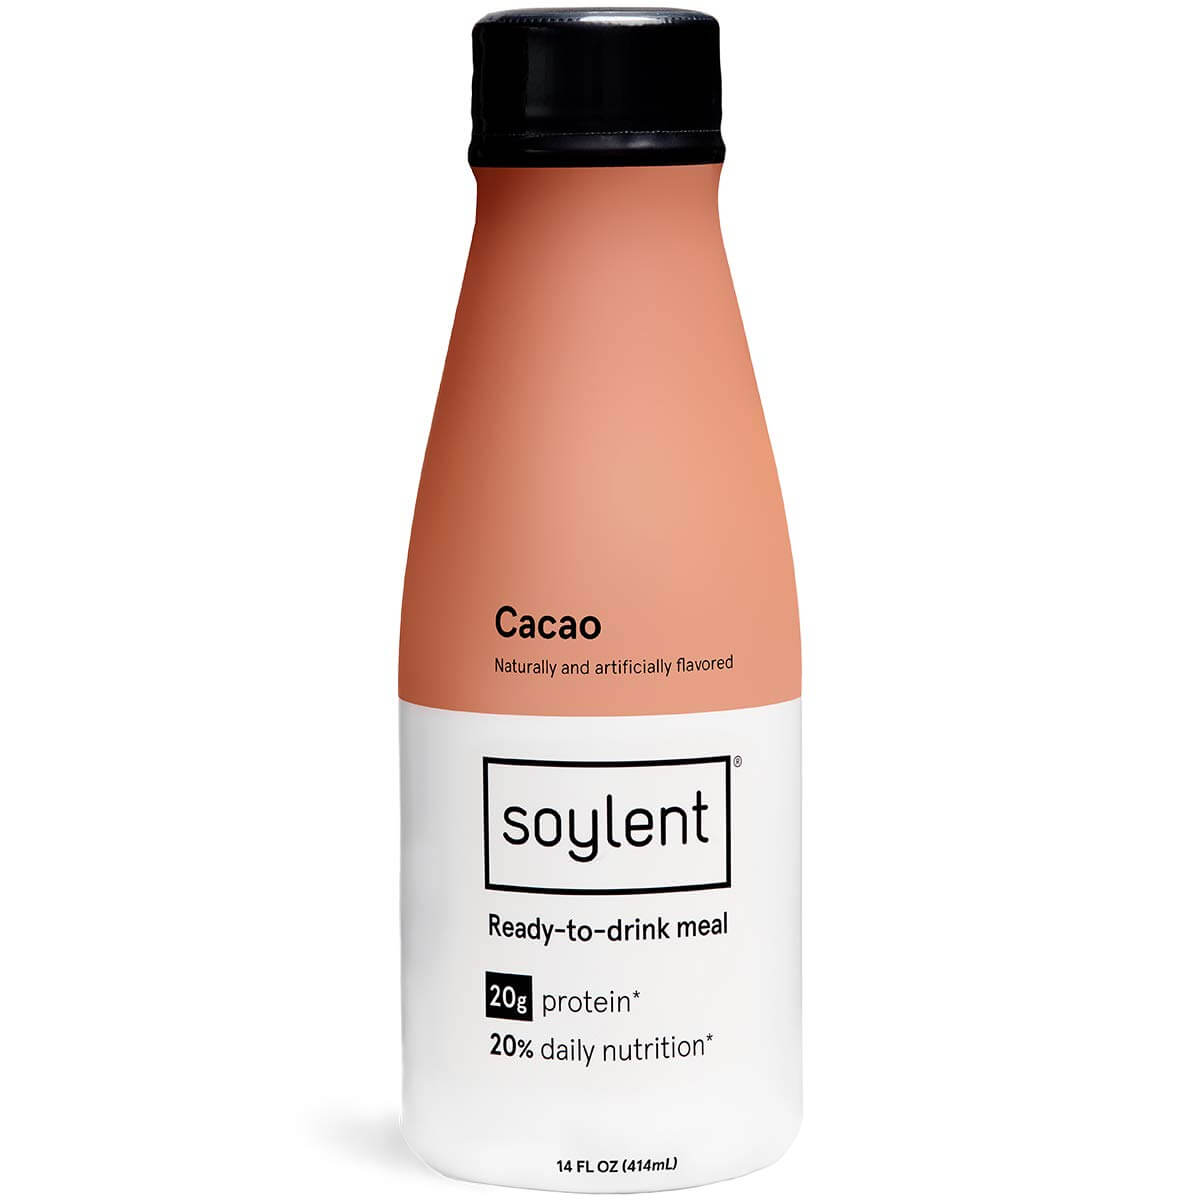 Soylent Cacao Flavor Meal Replacement Drink